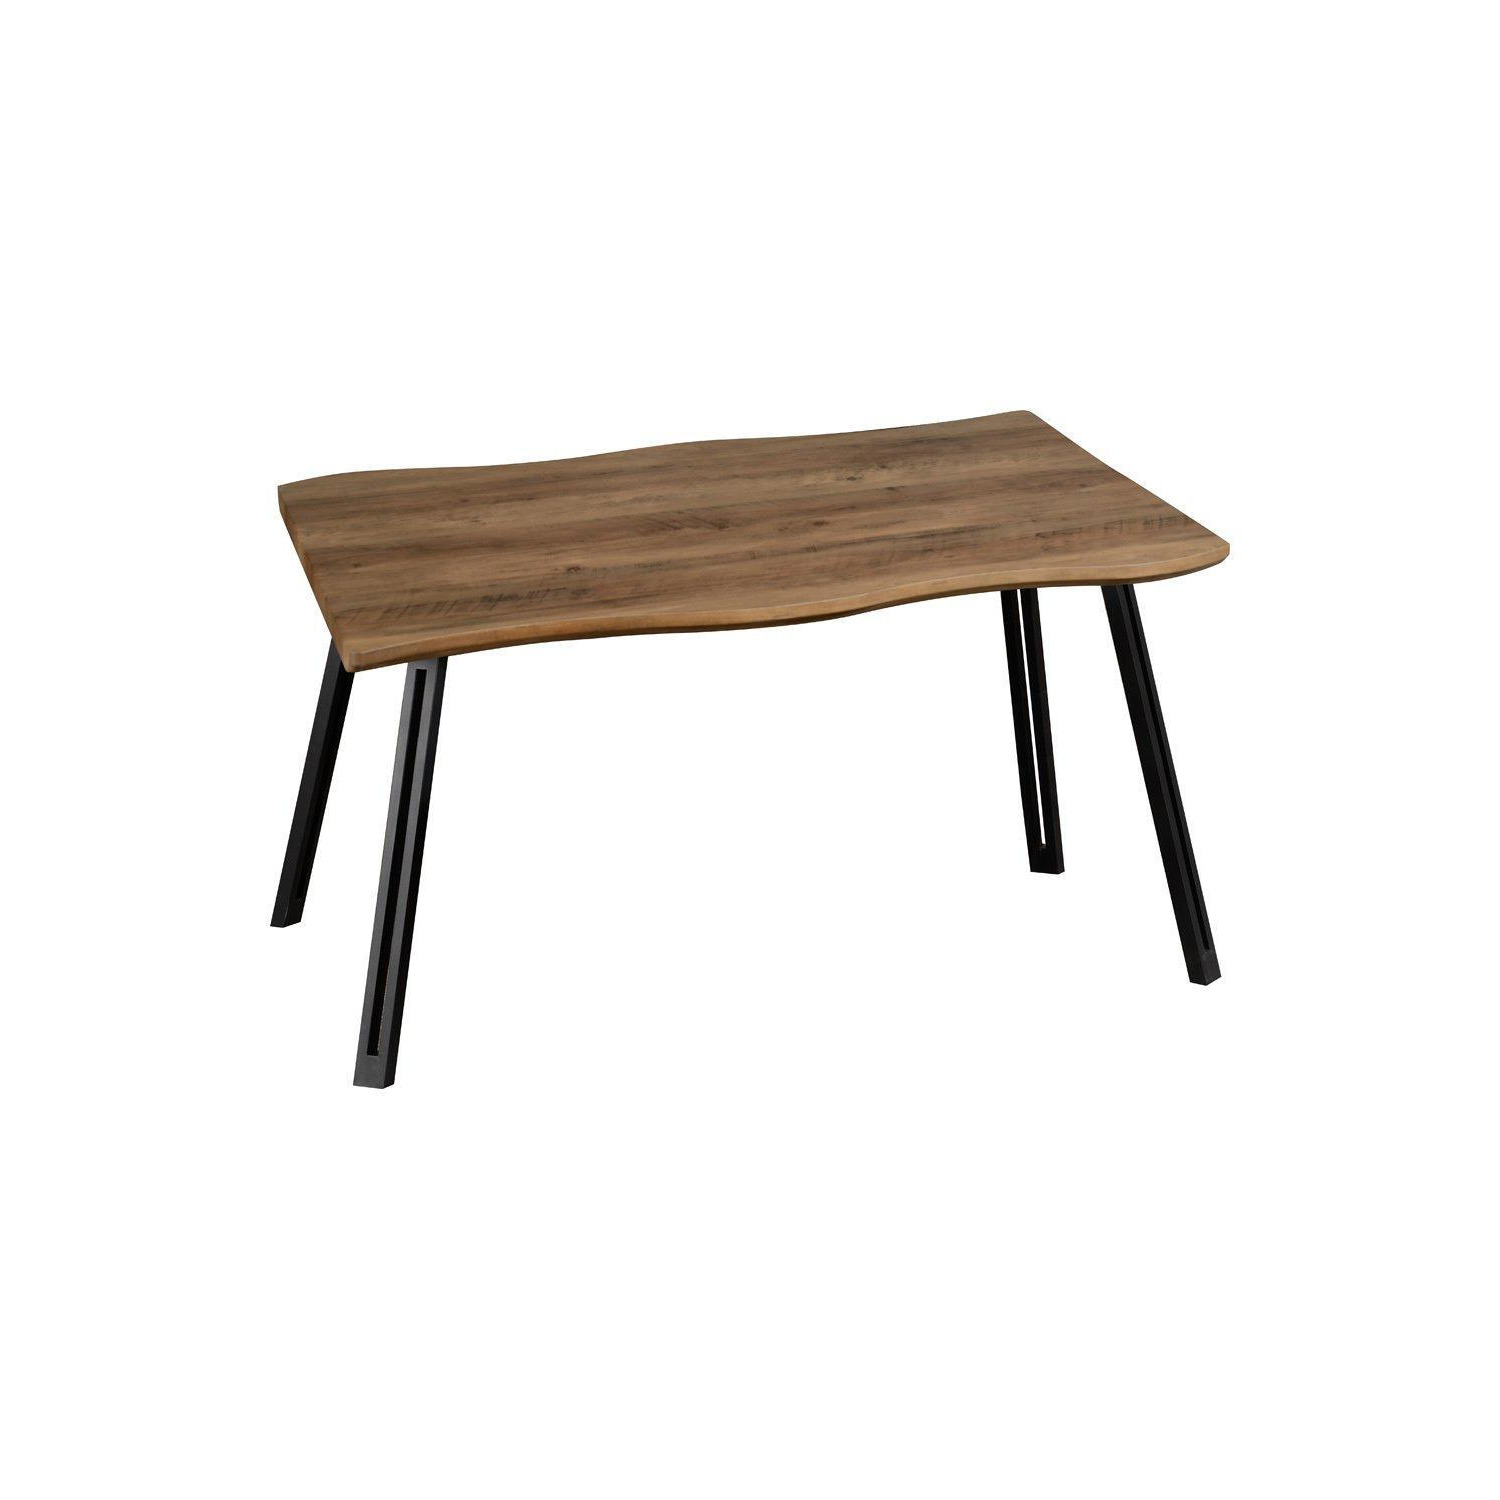 Quebec Wave Edge Dining Table - image 1